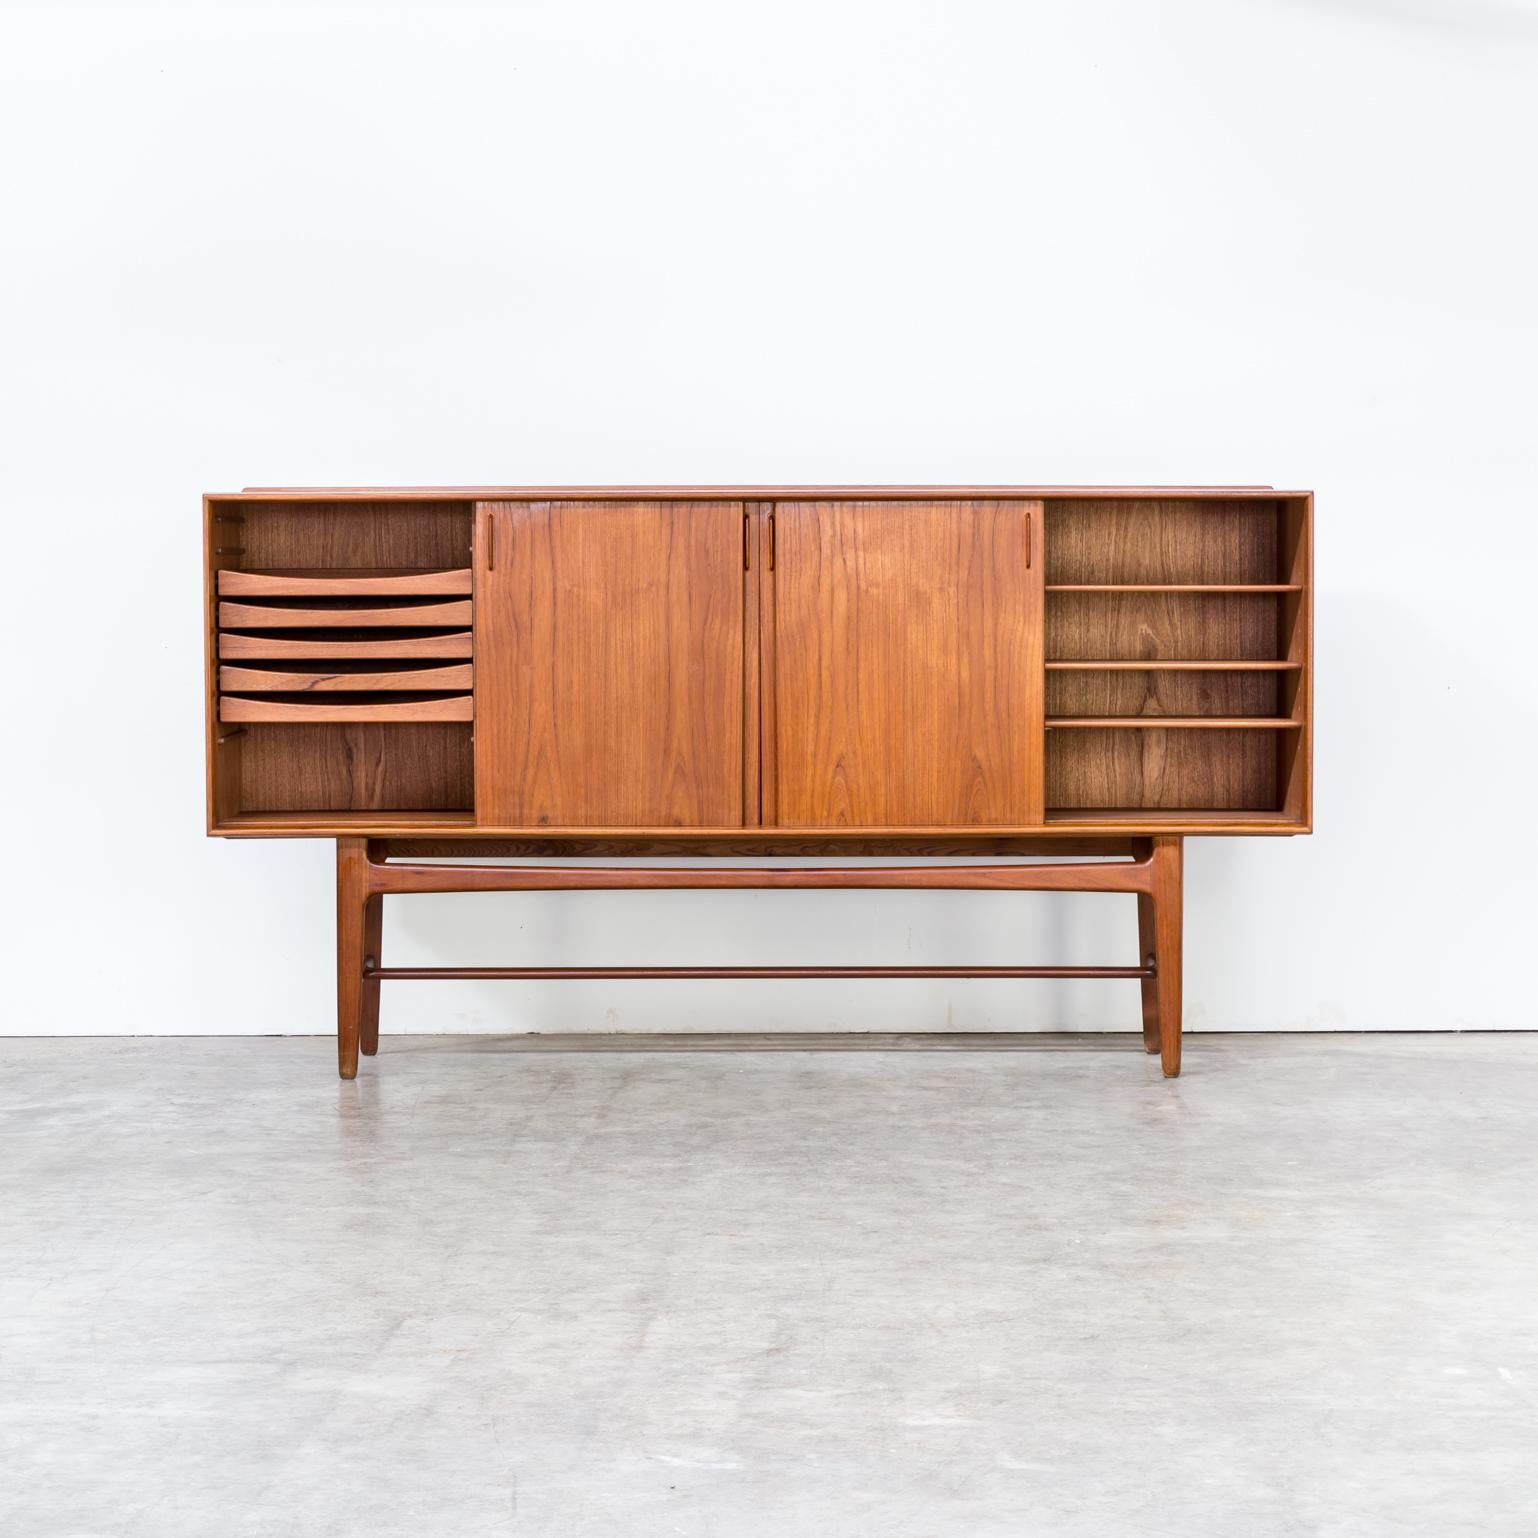 1950s Svend Aage Madsen sideboard for Knudsen & Son. Measure: Teak 225 cm sideboard in good condition consistent with age and use.